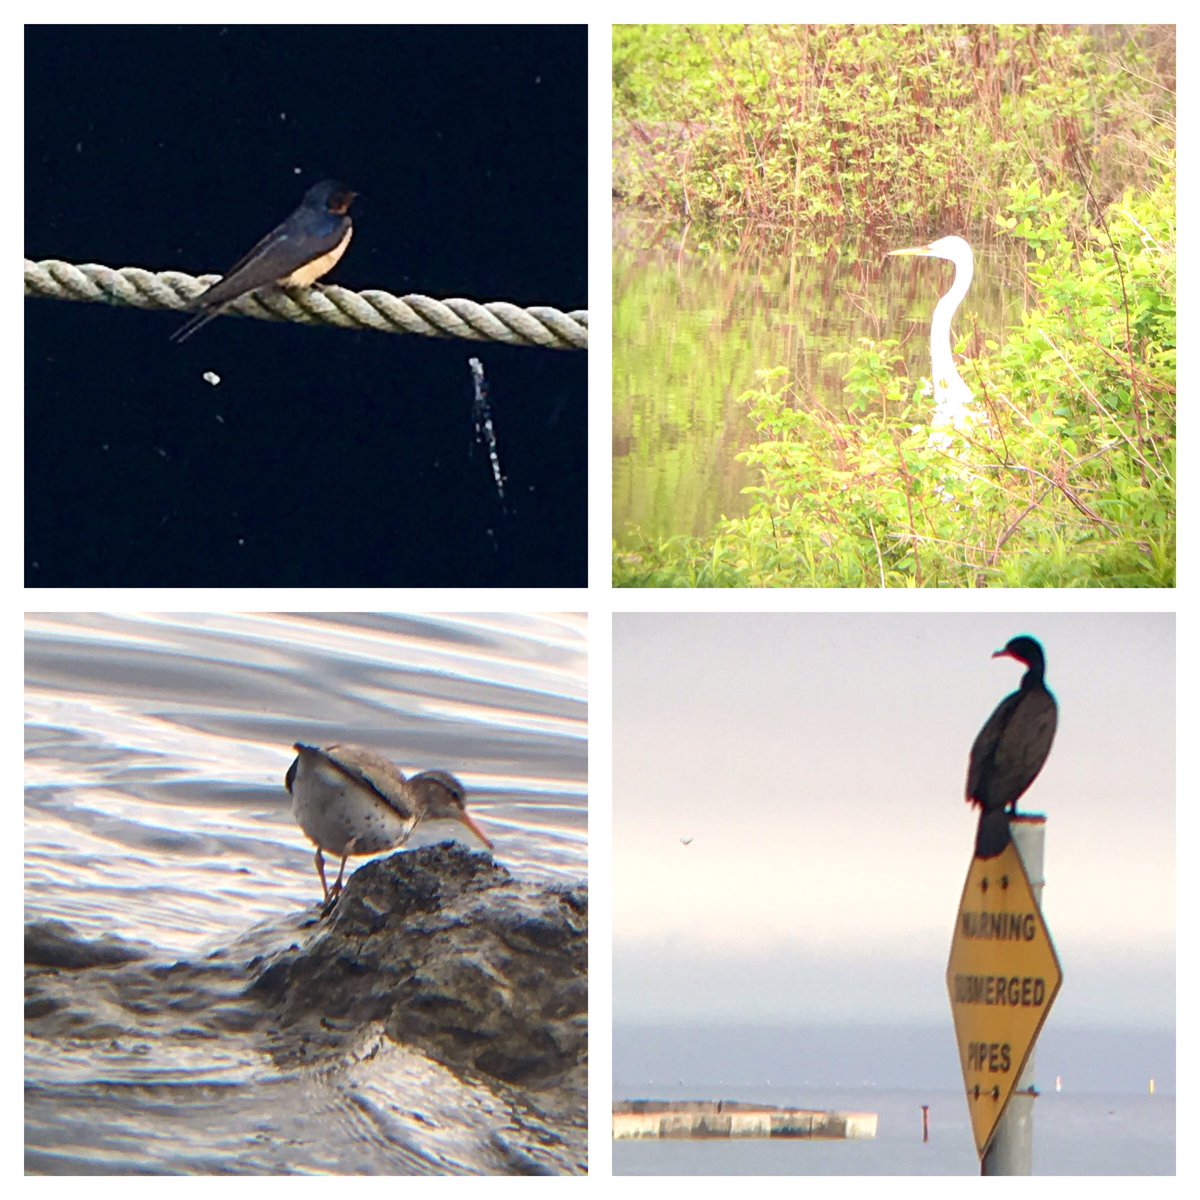 Ontario Place bird notes #4 | Over 22 species spotted this evening - including many barn swallows, an egret, spotted sandpiper, dozens of cormorants, cliff swallows, chimney swift, gray catbird, cedar waxwings, American goldfinch, and a mink!